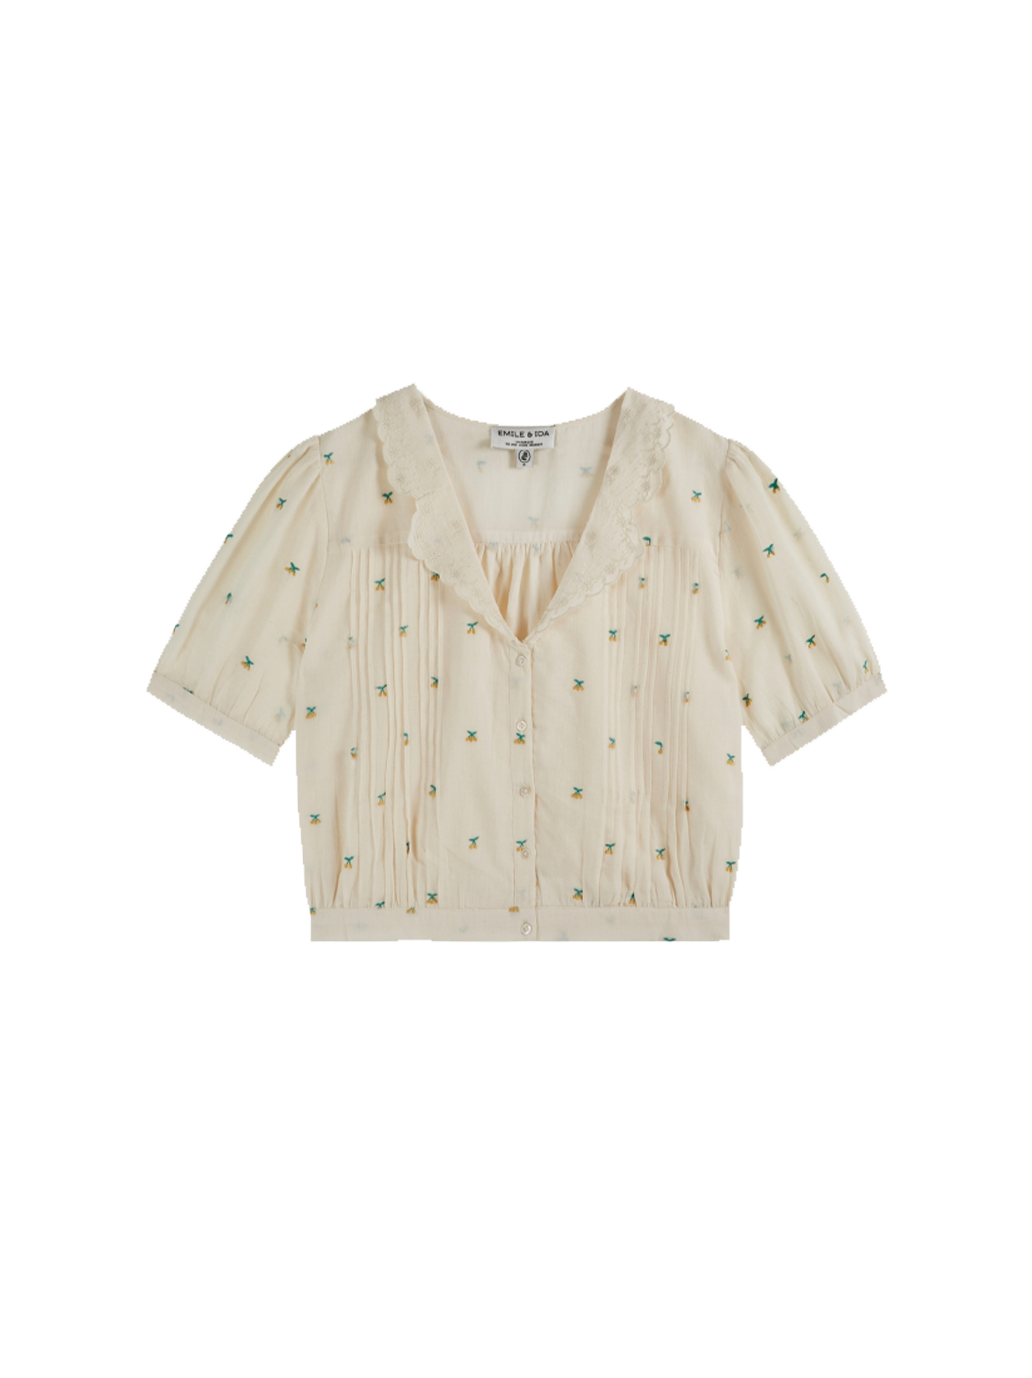 Women's blouse with embroidered details